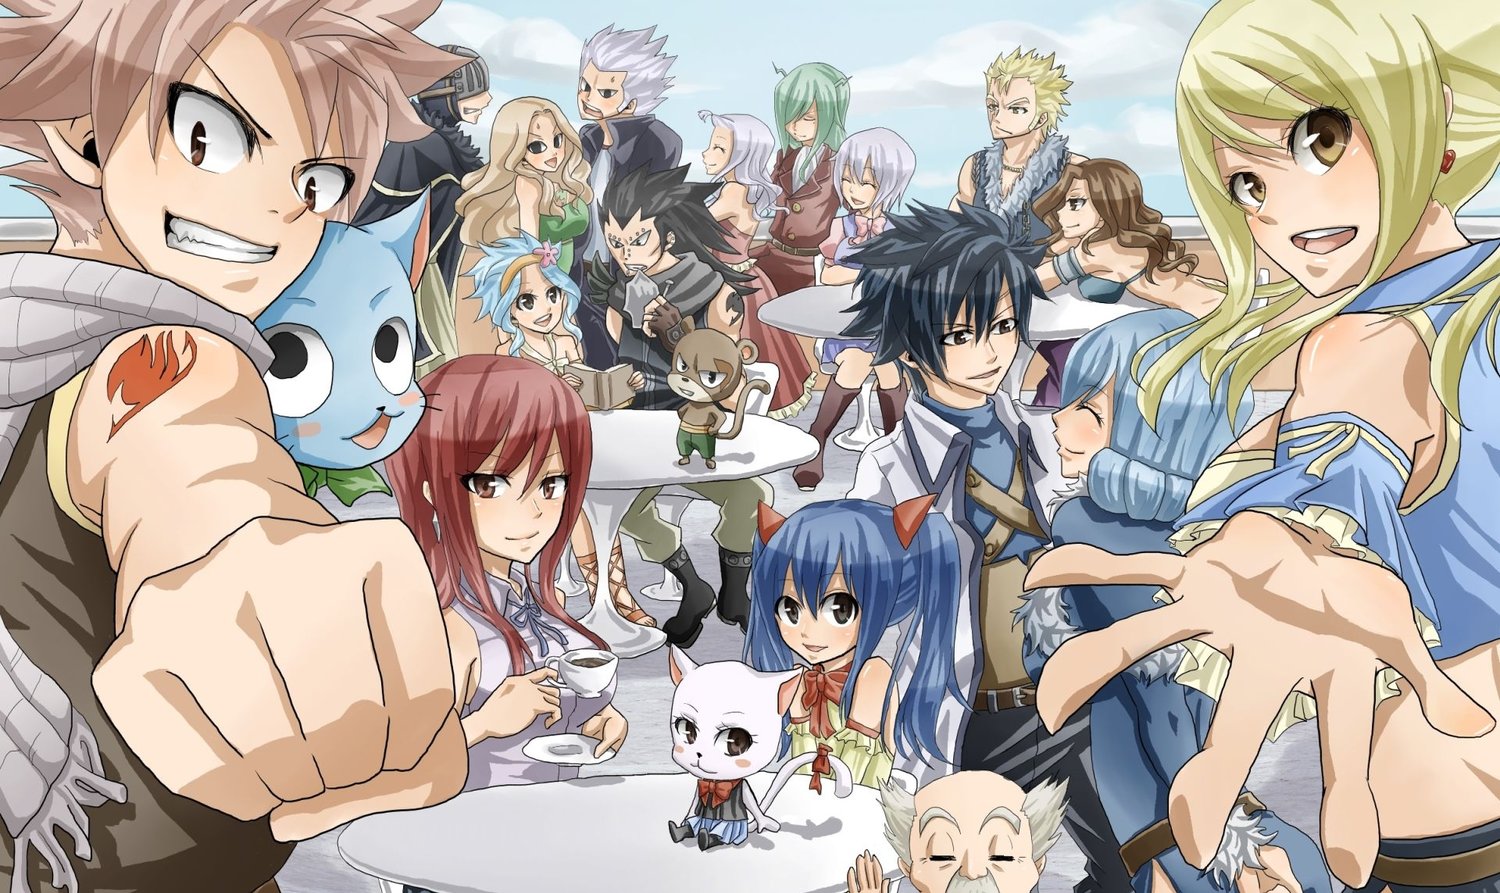 Anime Art Characters Fairy Tail by Anime Art